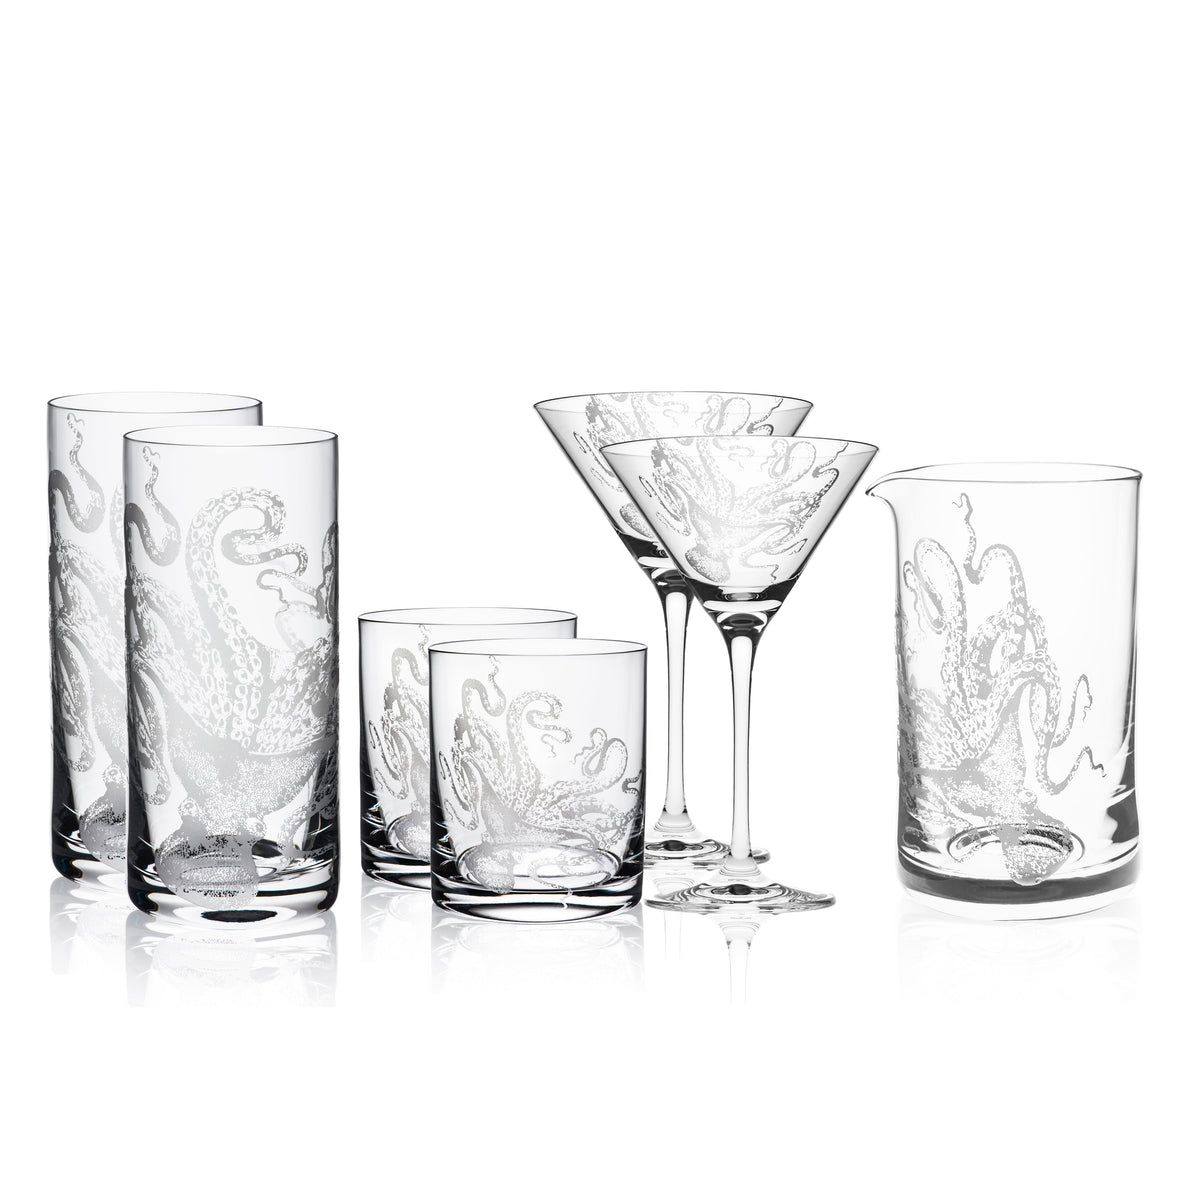 A set of Lucy Rocks Glasses from Caskata Artisanal Home, including highball, lowball, and martini glasses, each decorated with an etched octopus design created using the sand-etching technique.